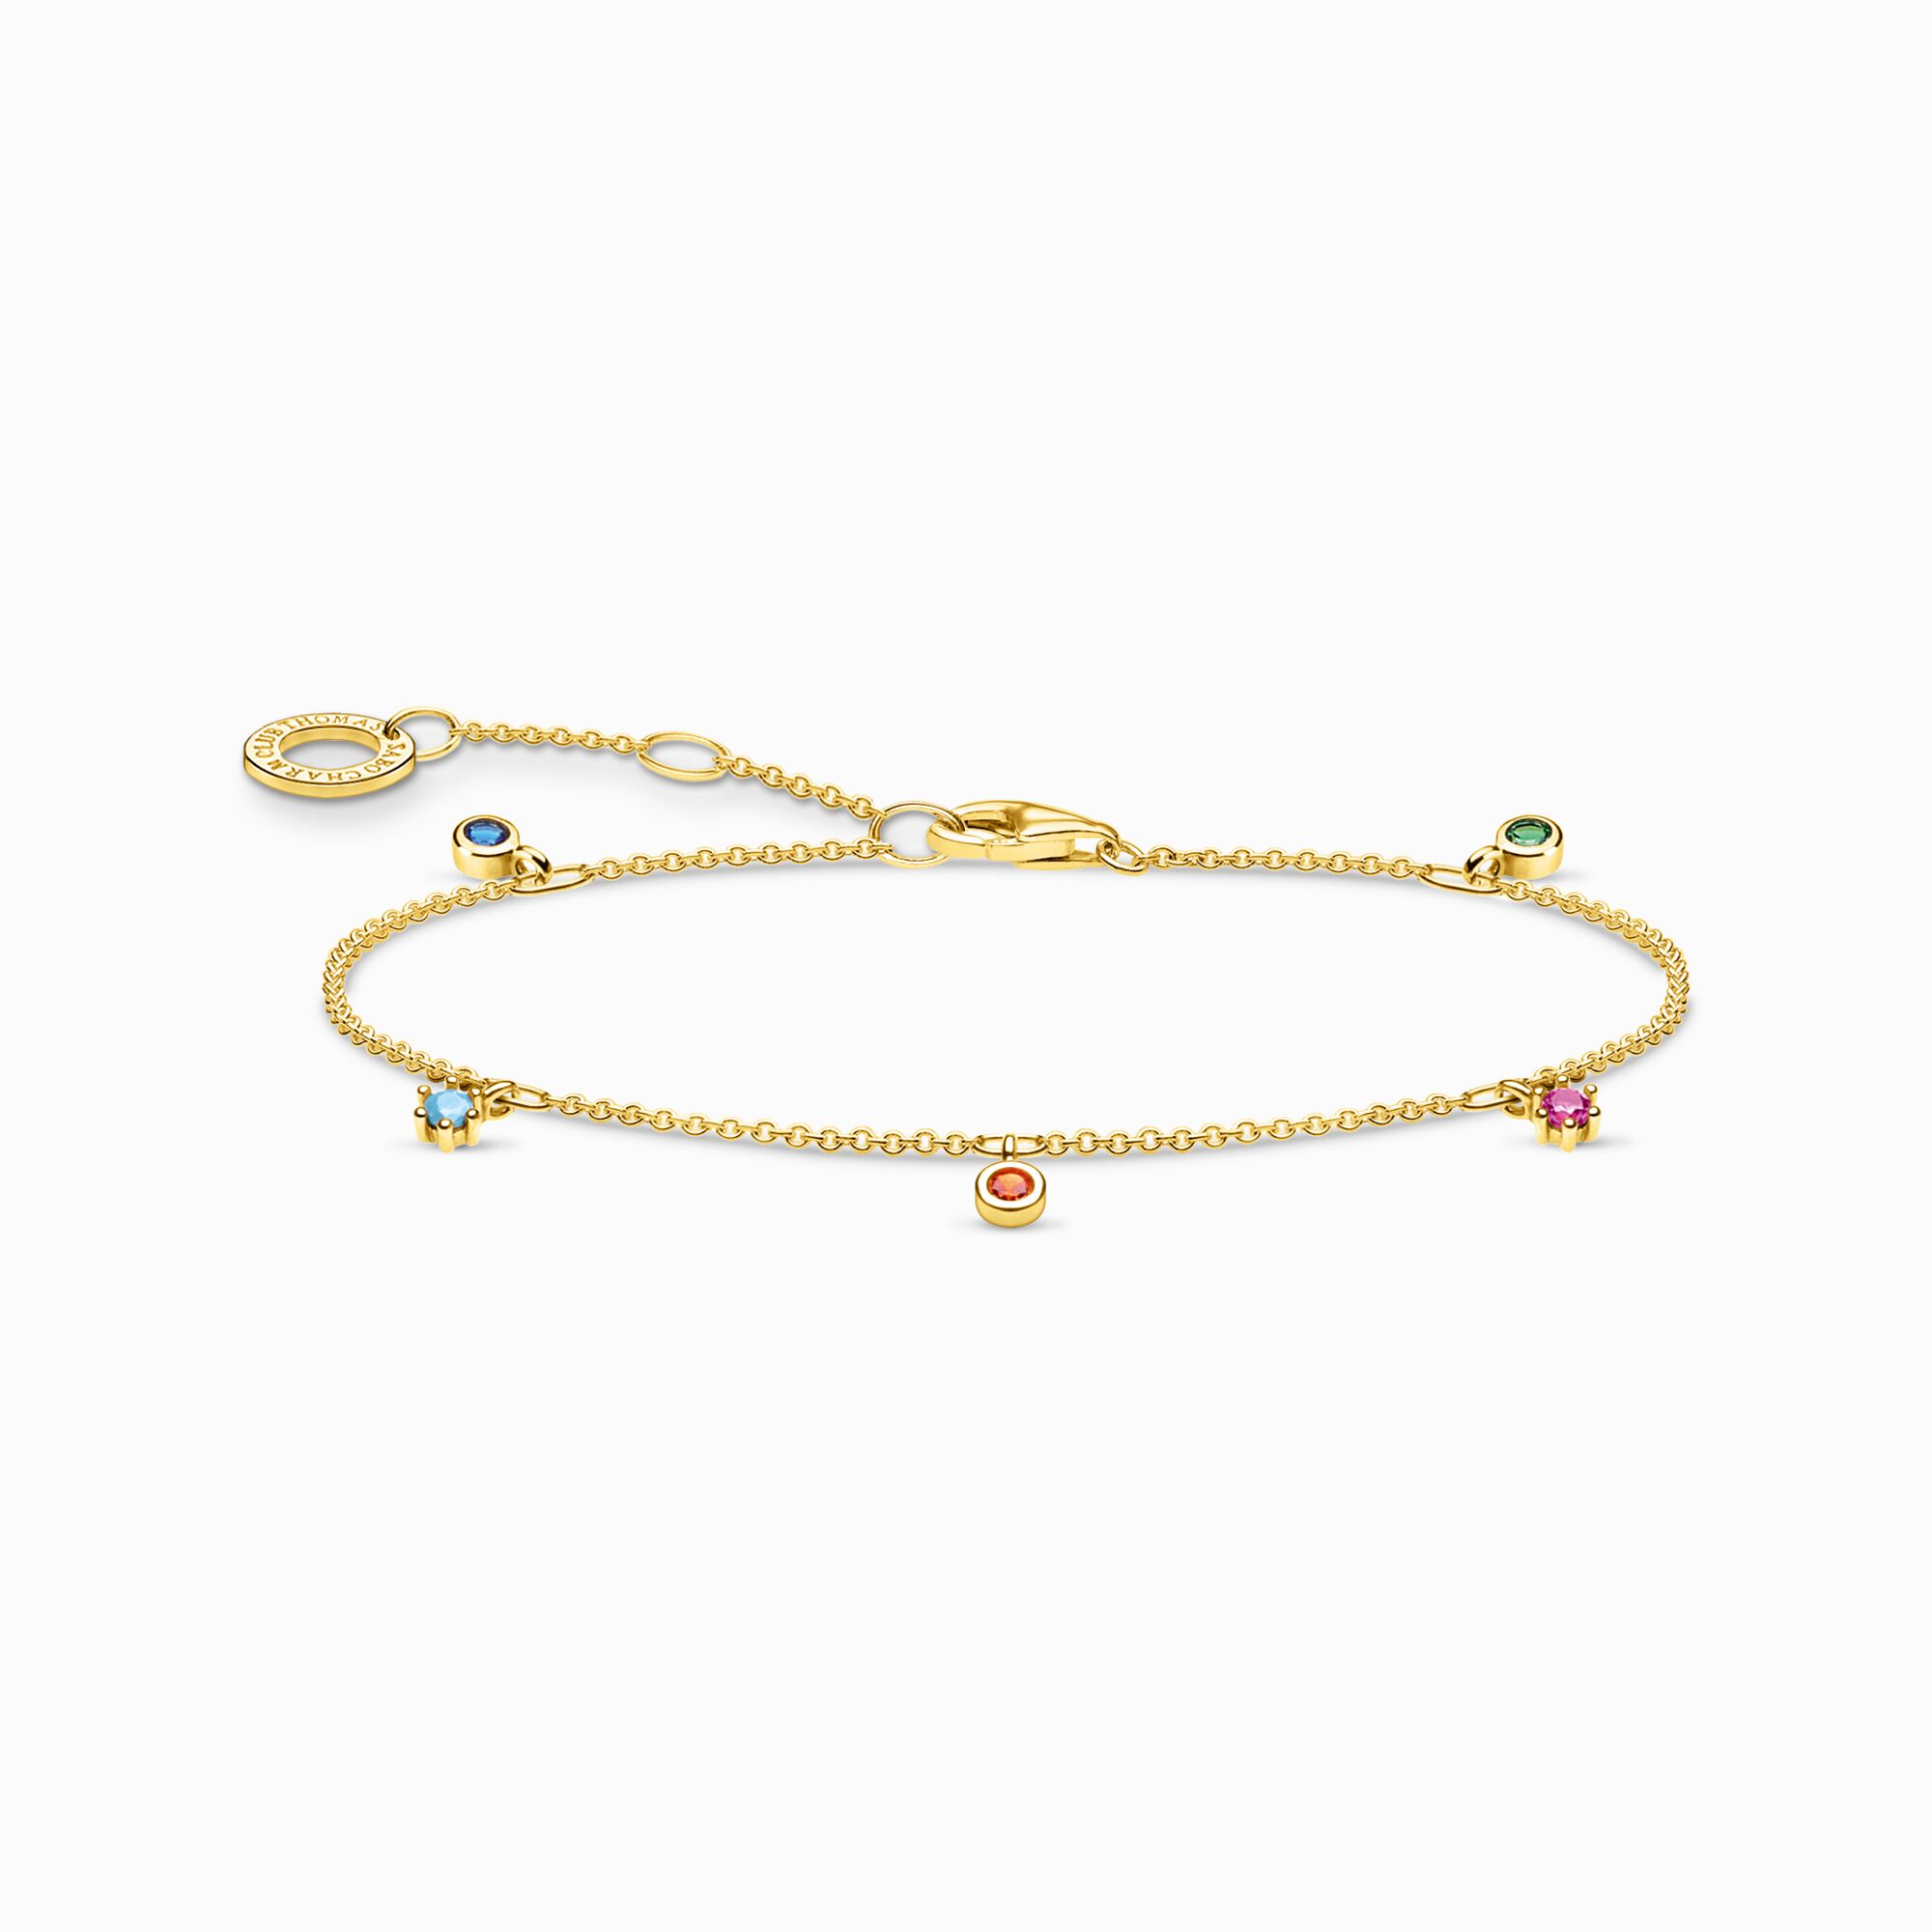 Bracelet colourful stones, gold from the Charming Collection collection in the THOMAS SABO online store